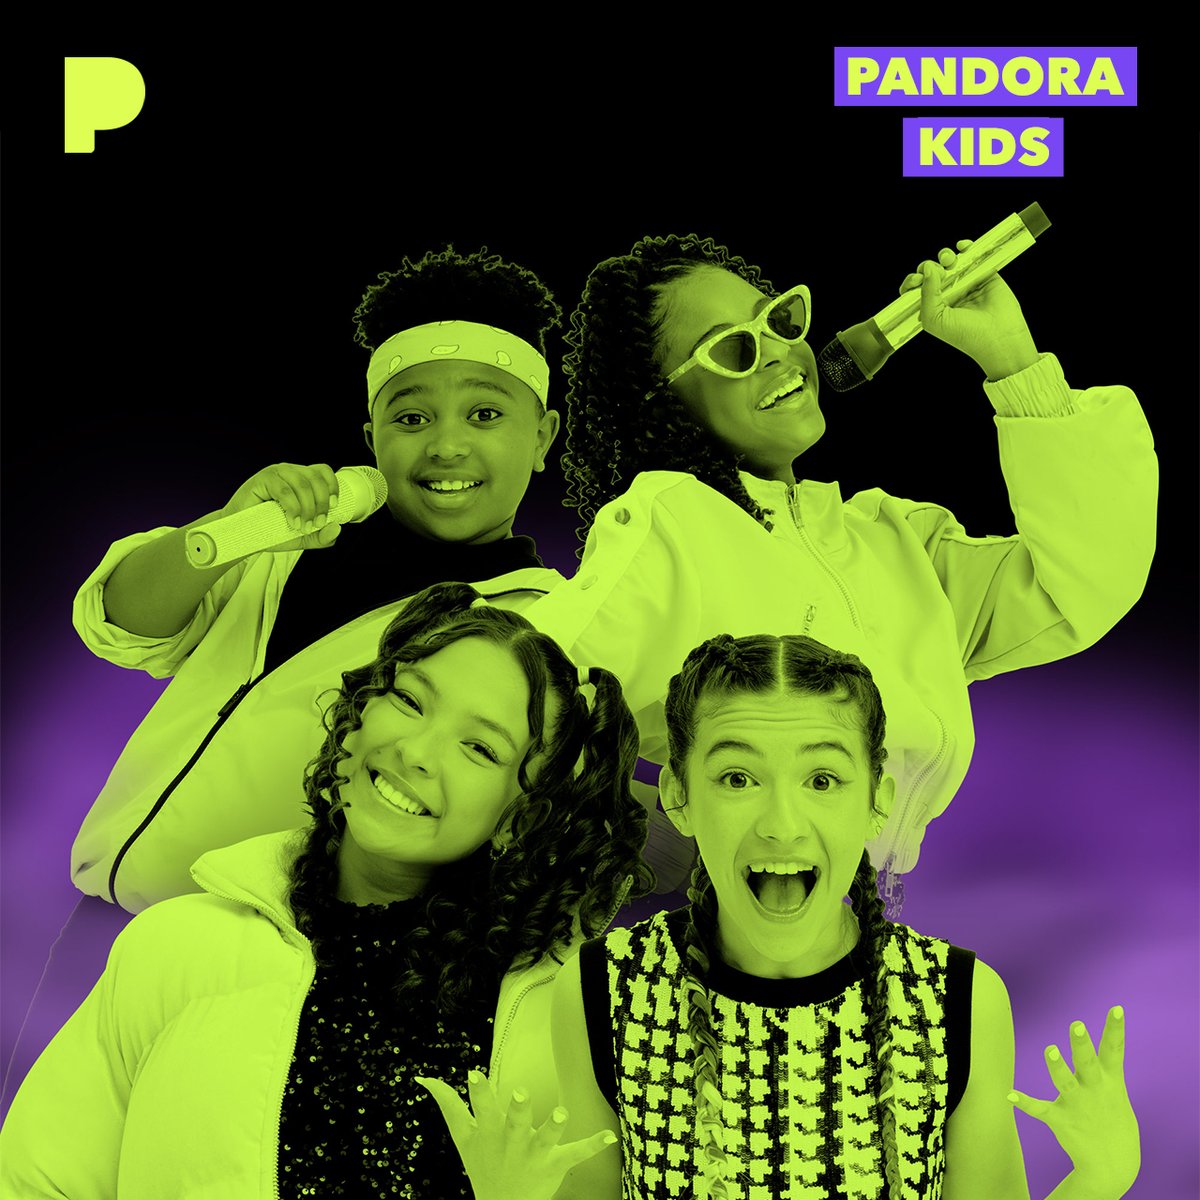 We’re taking over the @pandoramusic Kids Station to give you the spookiest playlist this Halloween season! 🎶🎃 Join & dance along with us! 👻➡️ pandora.app.link/gU3bySWPRDb